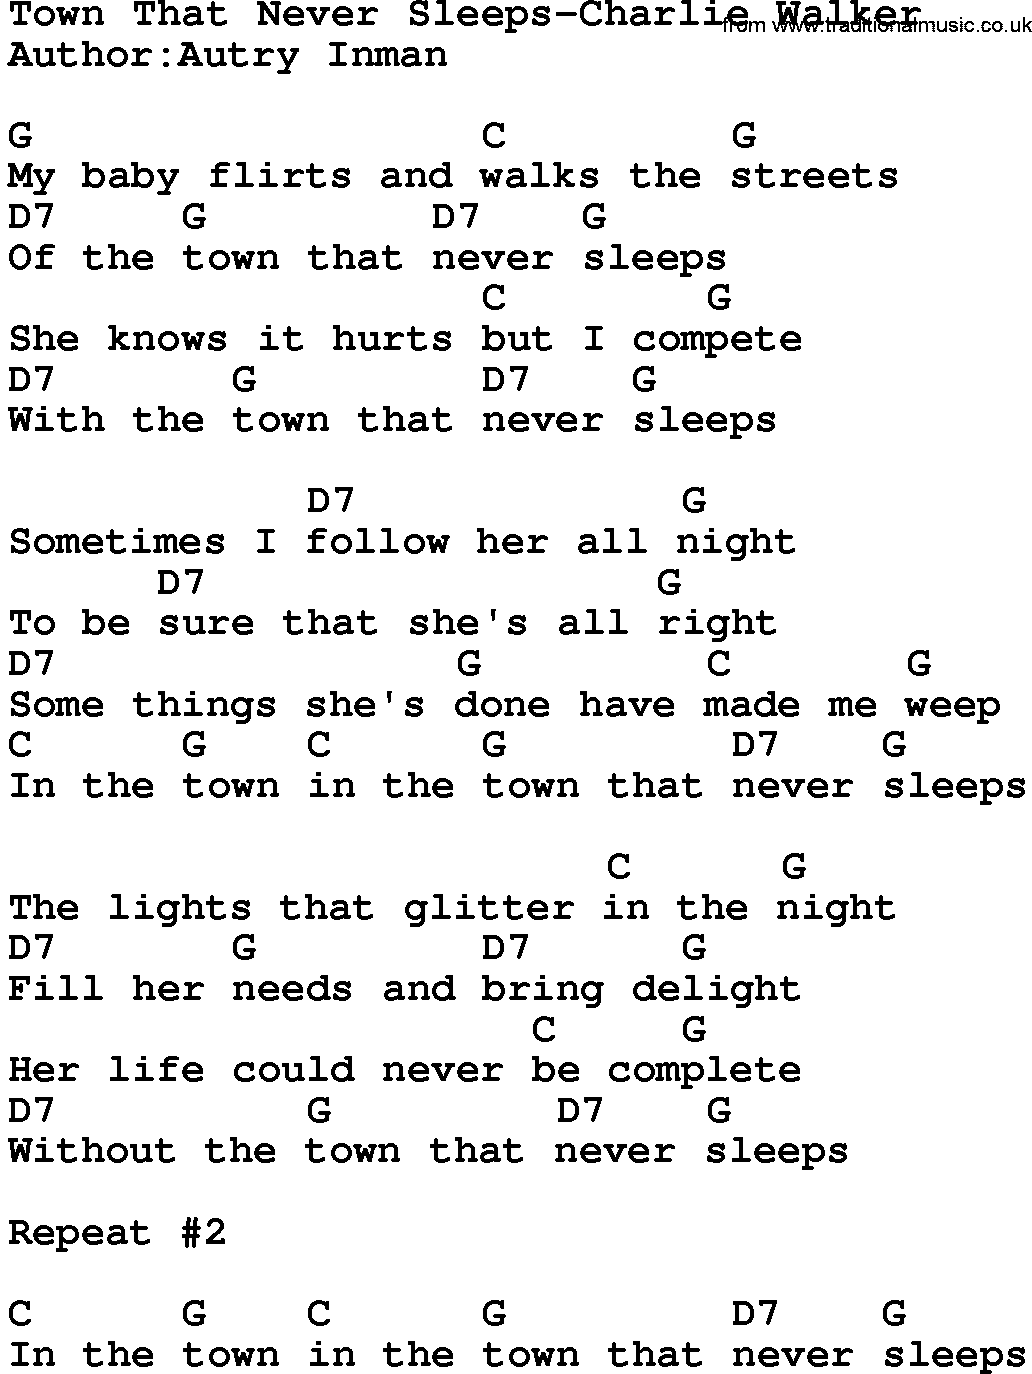 Country music song: Town That Never Sleeps-Charlie Walker lyrics and chords